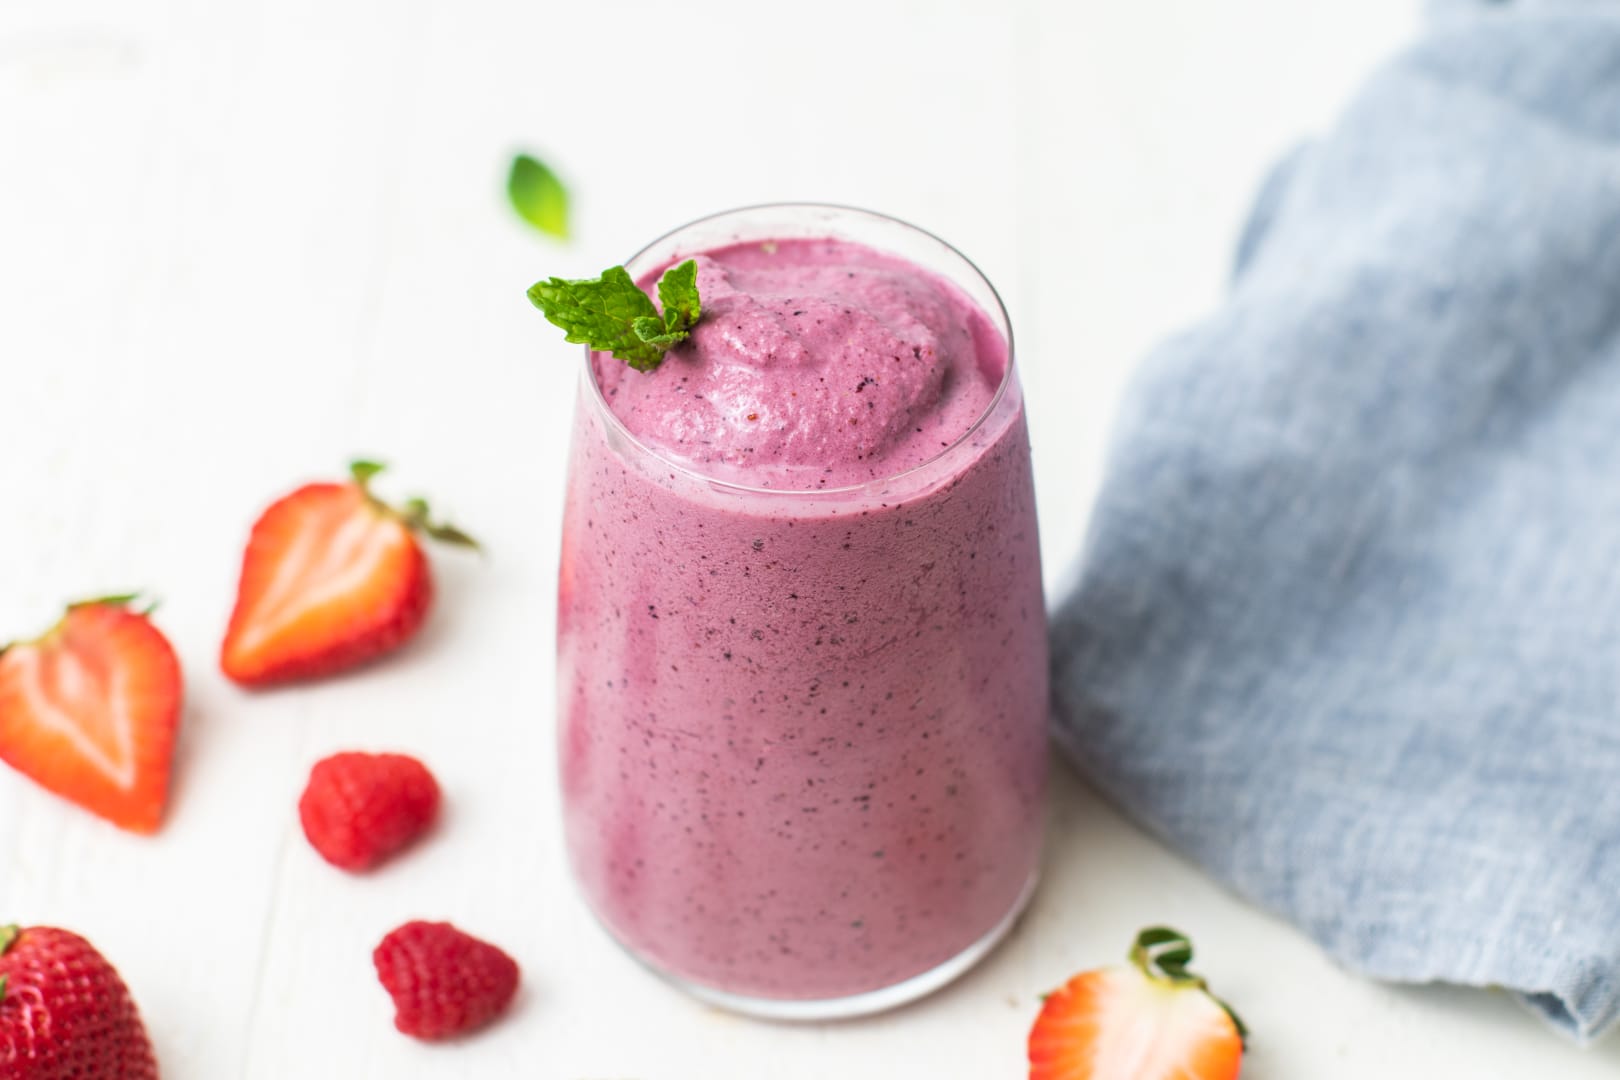 Dairy-Free Keto Smoothies under 15 Carbs